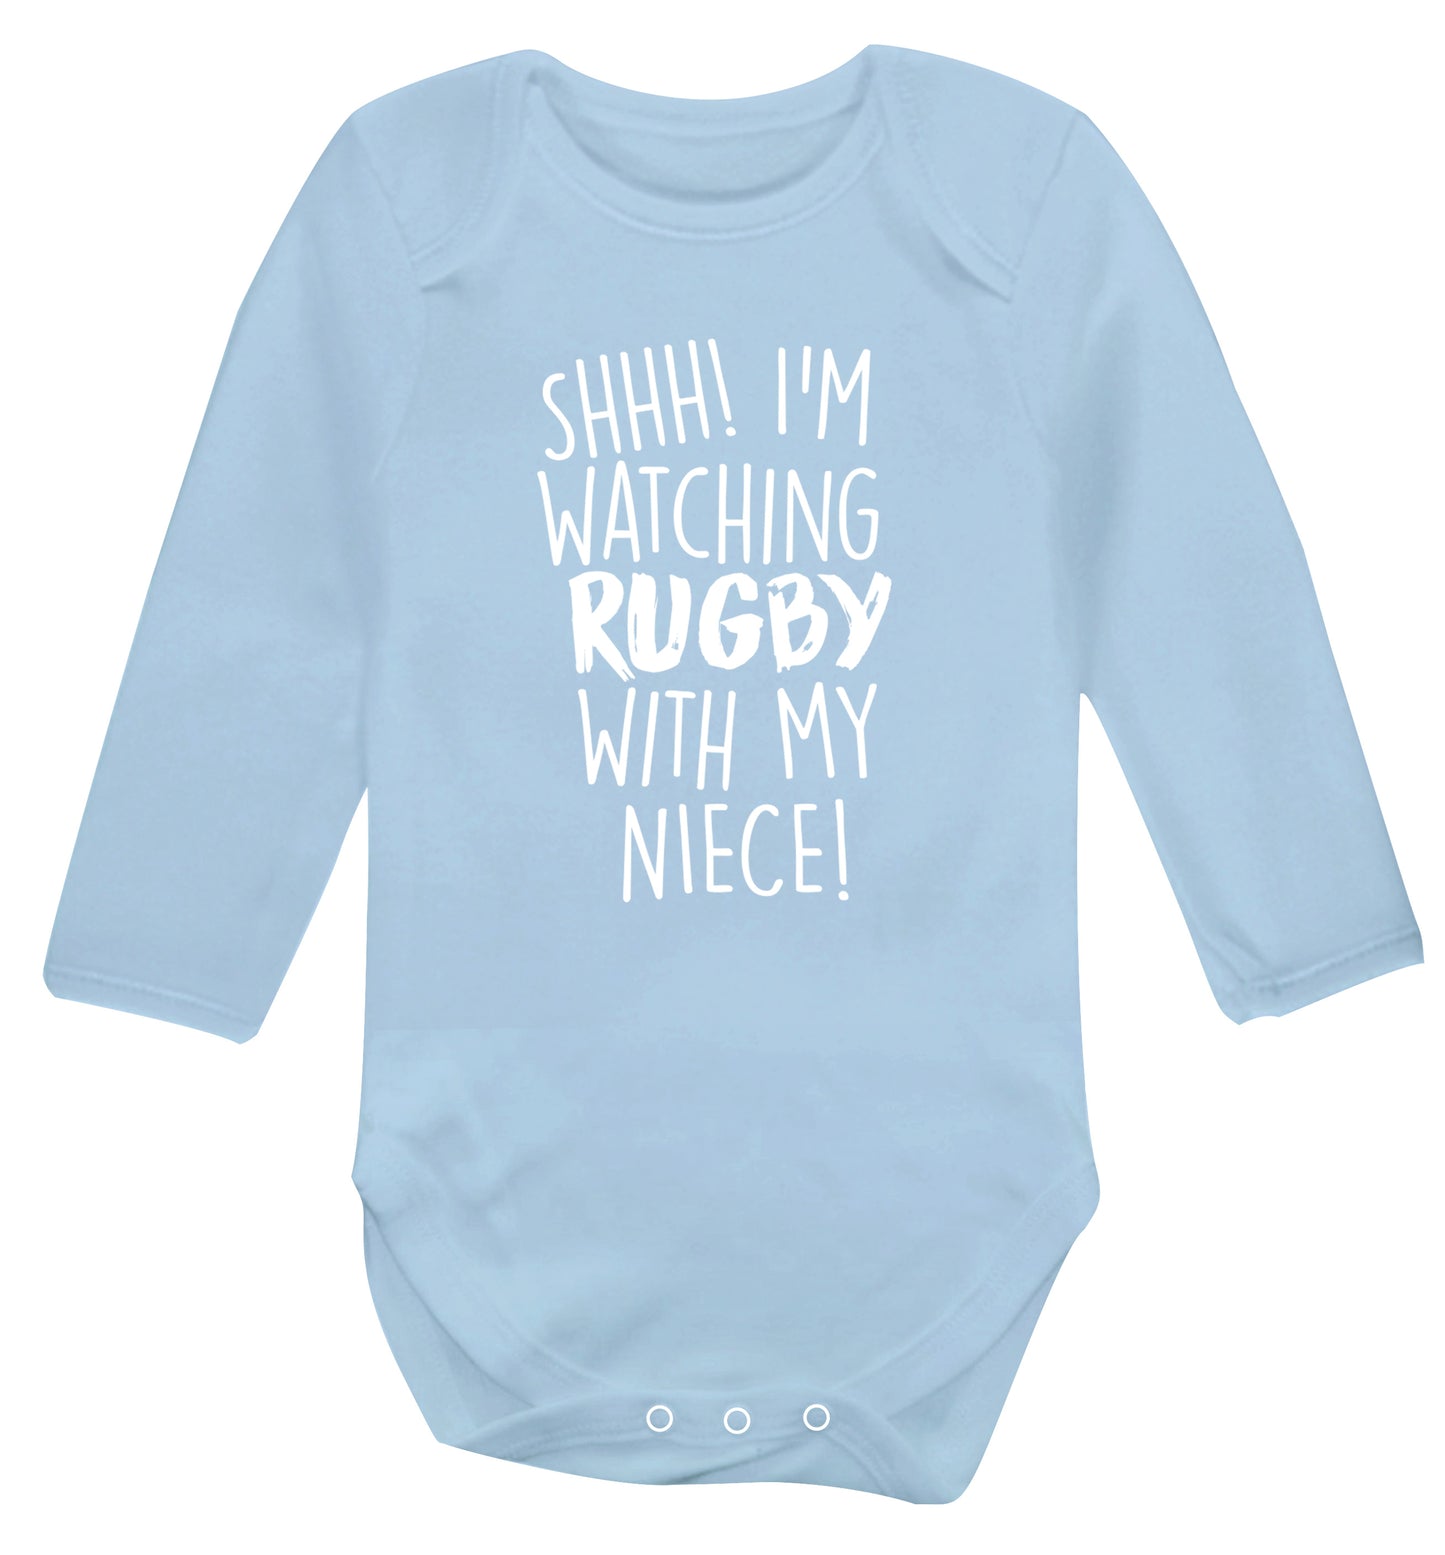 Shh.. I'm watching rugby with my niece Baby Vest long sleeved pale blue 6-12 months